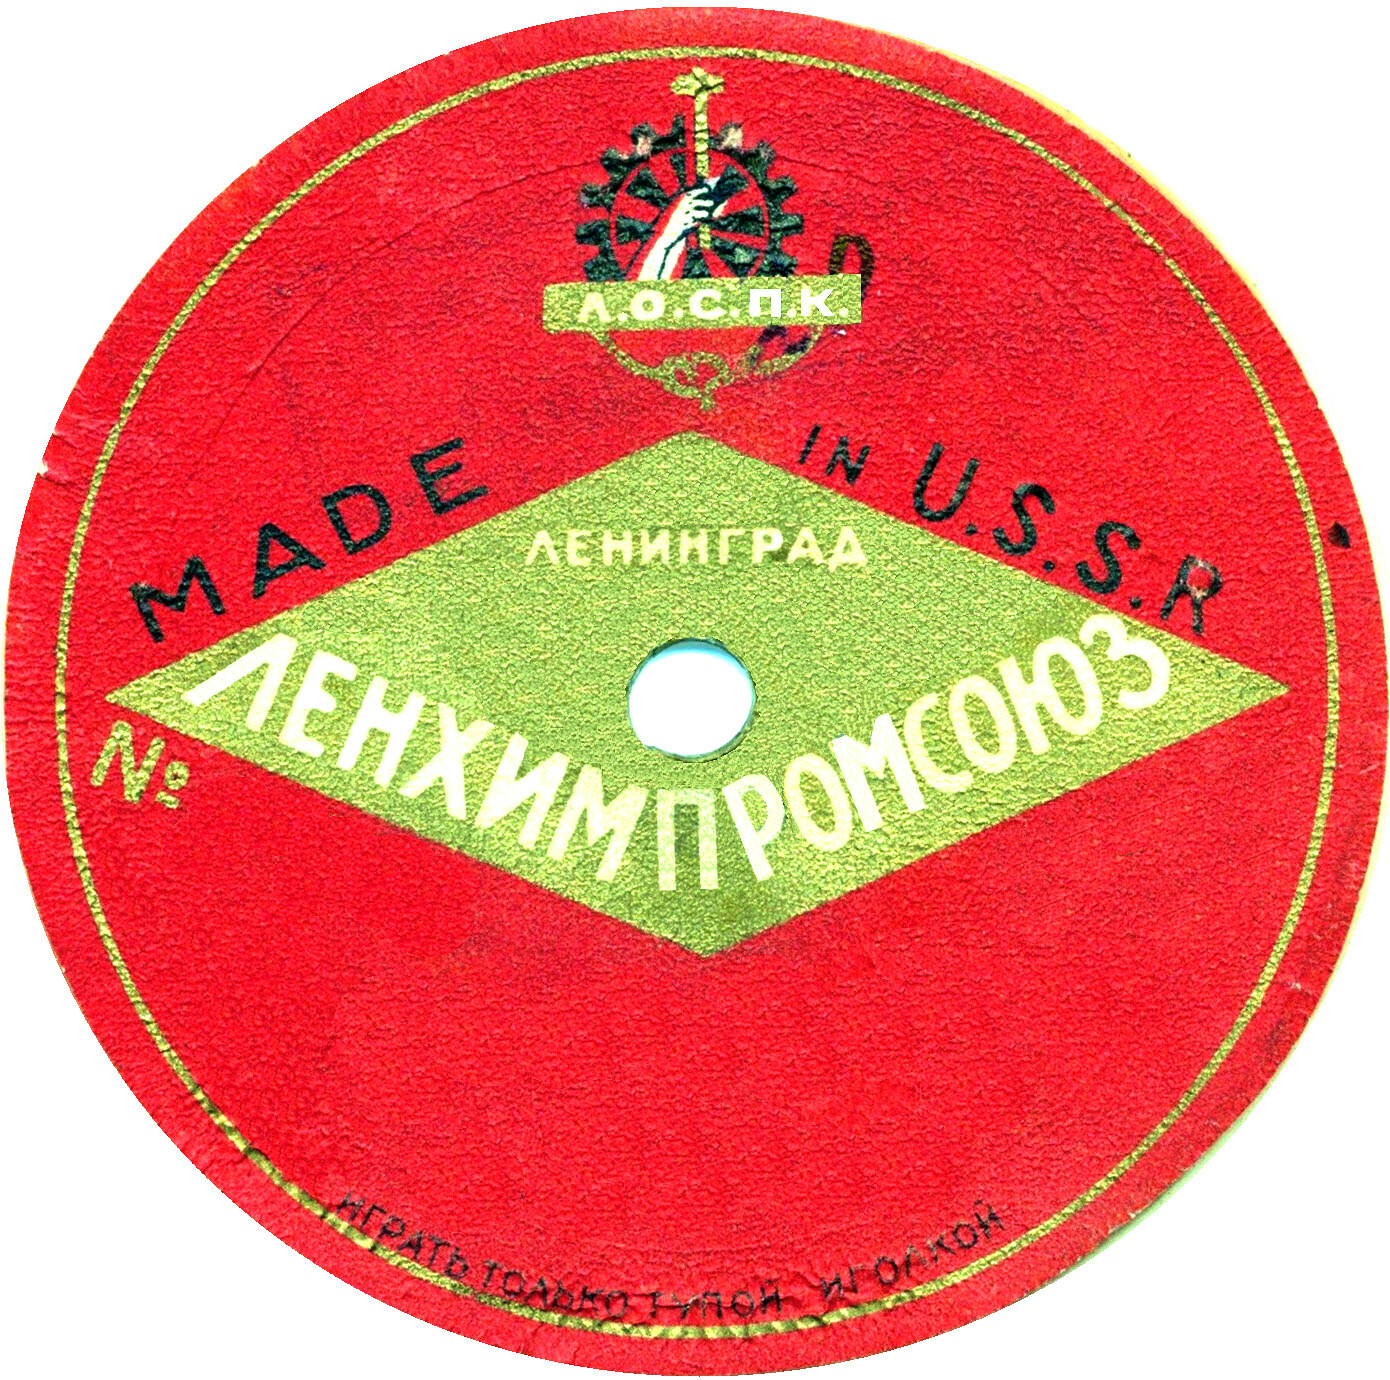 Made in U.S.S.R. ЛОСПК